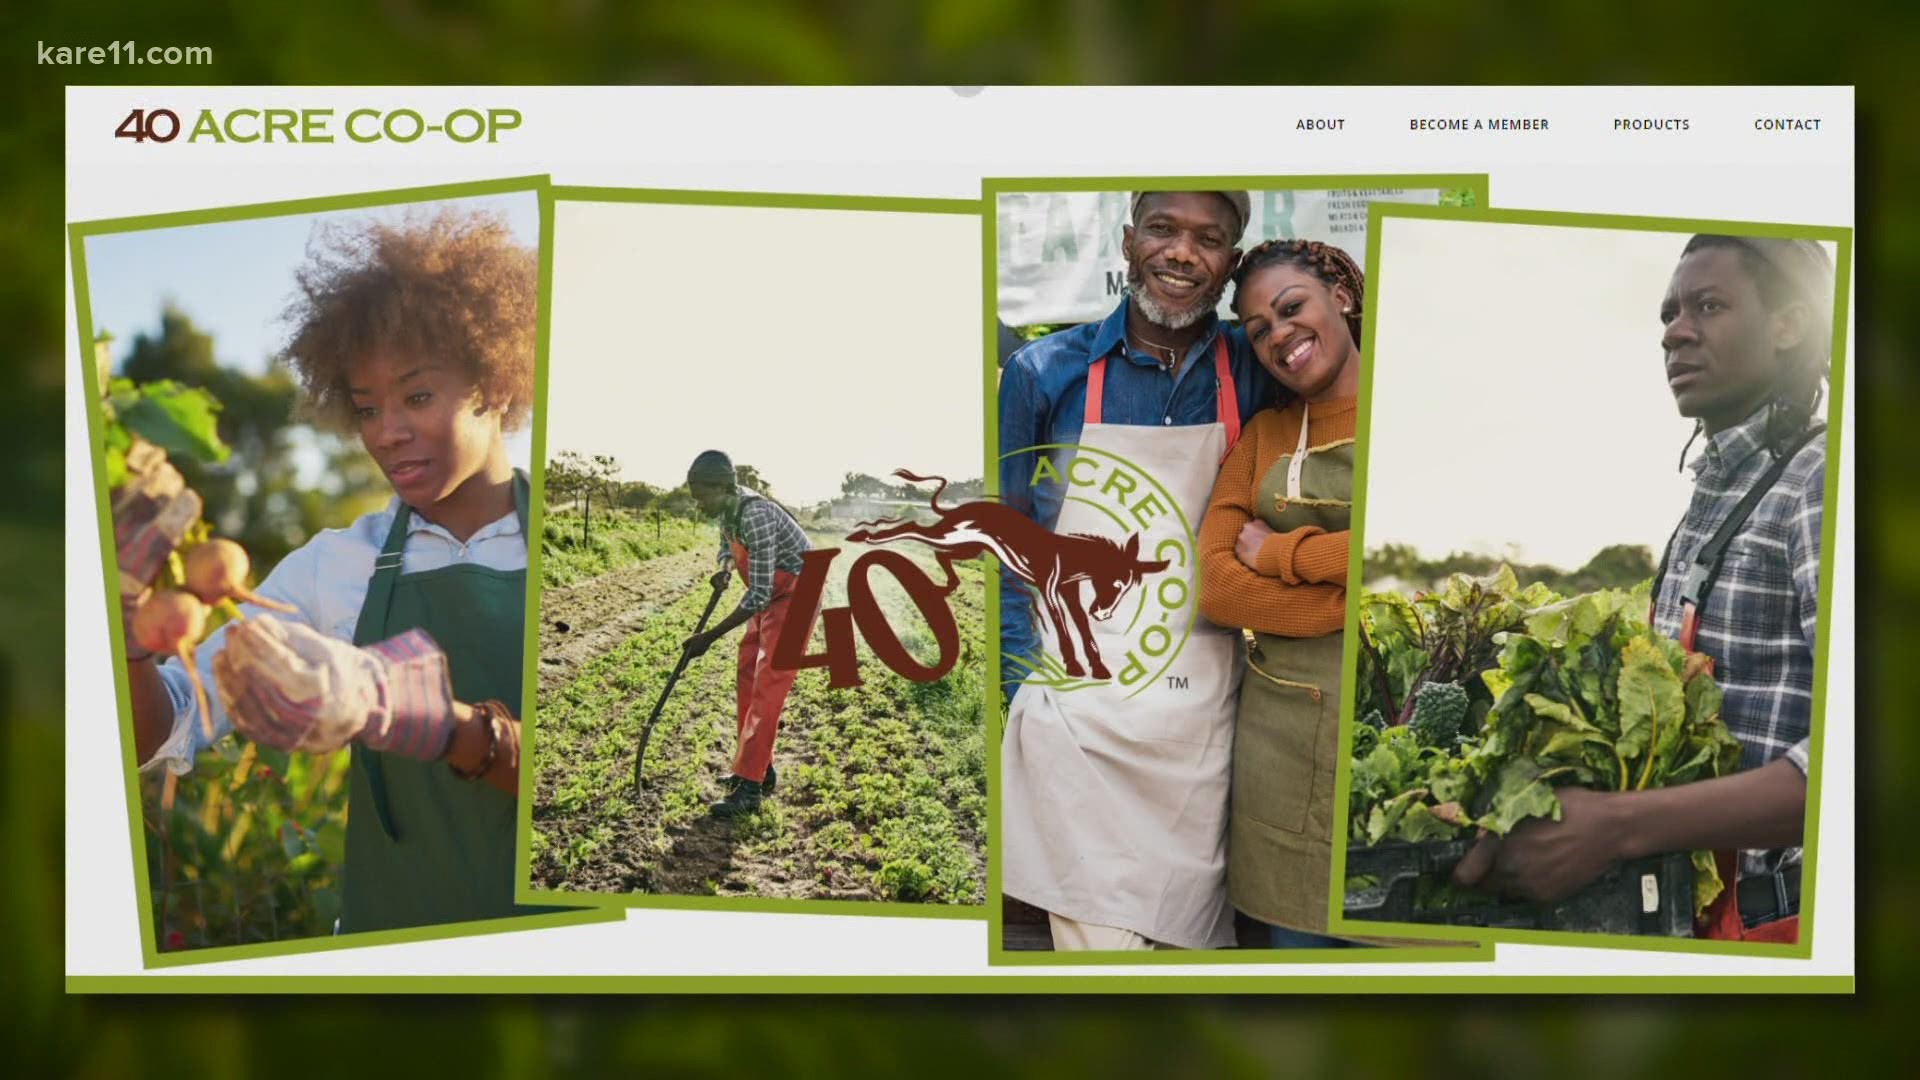 The 40-Acre Co-Op is providing a space for Black farmers to empower themselves.